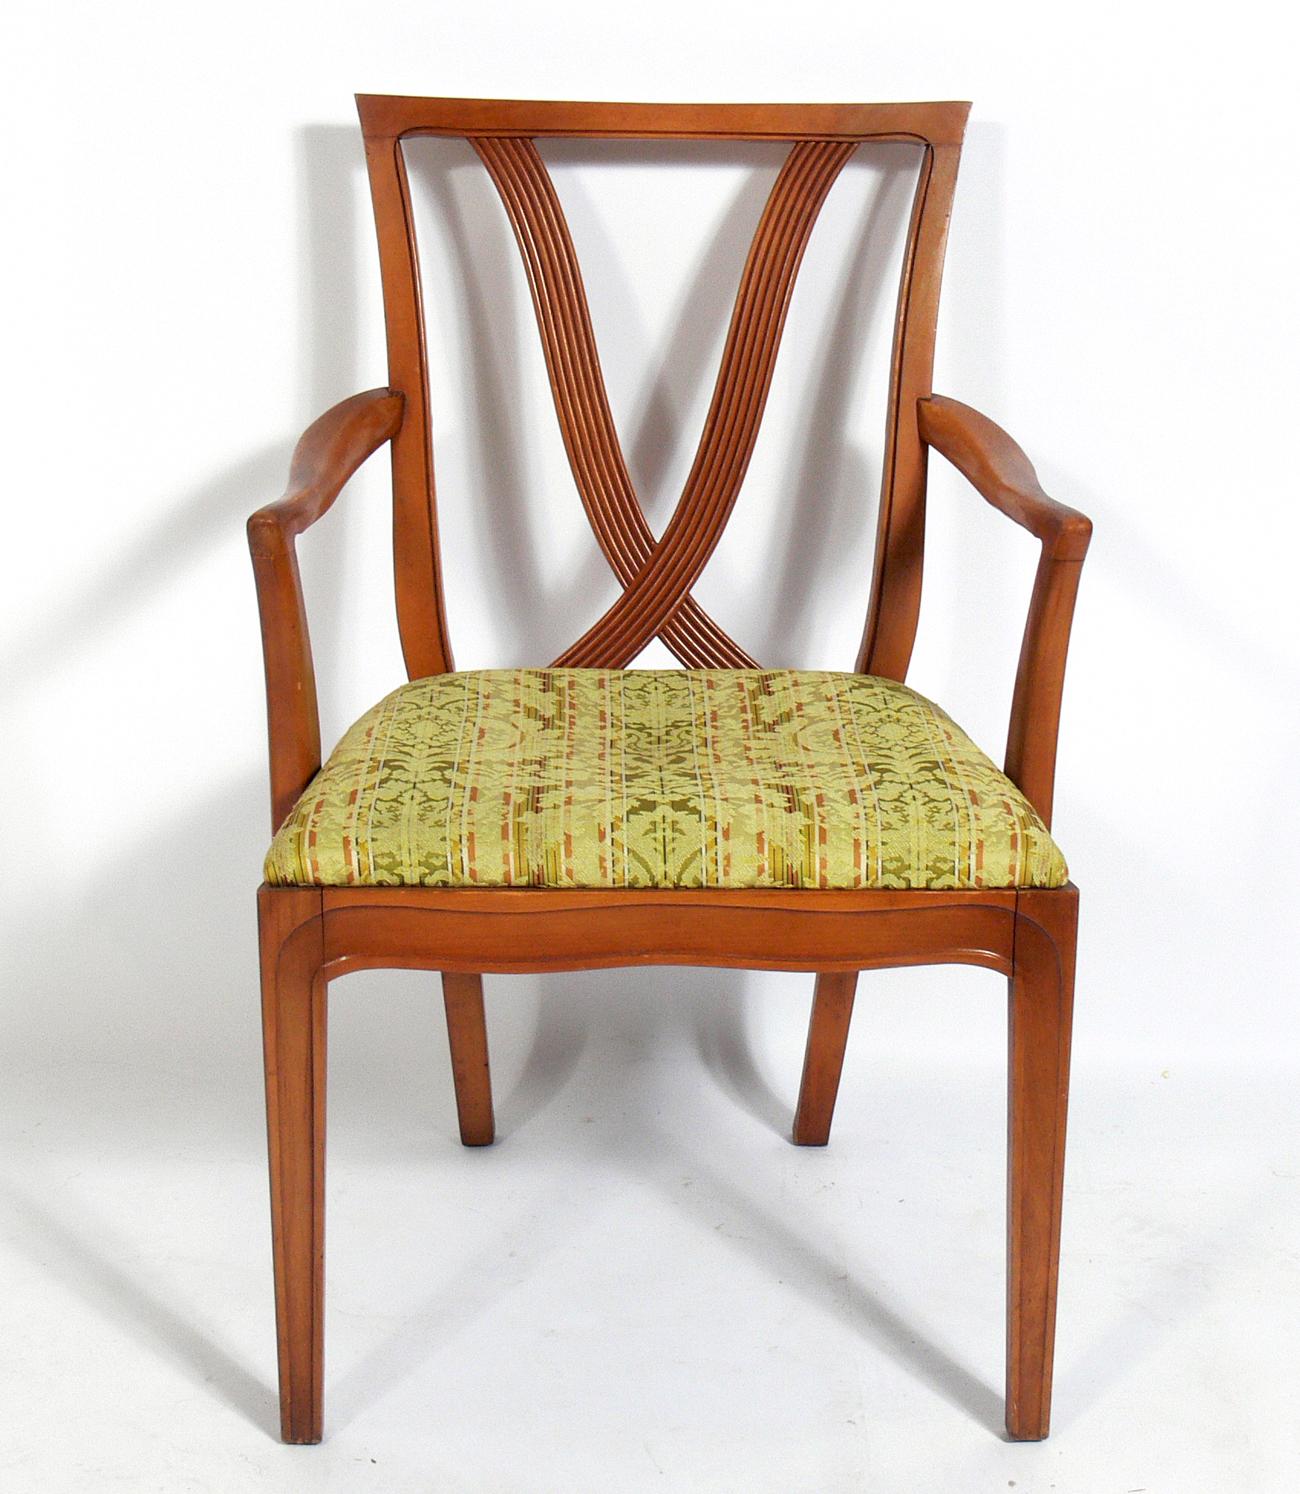 Glamorous X back dining chairs, designed by Tomlinson, American, circa 1950s. These chairs are currently being refinished and reupholstered and can be completed in your choice of color and in your fabric. The price noted Includes refinishing in your